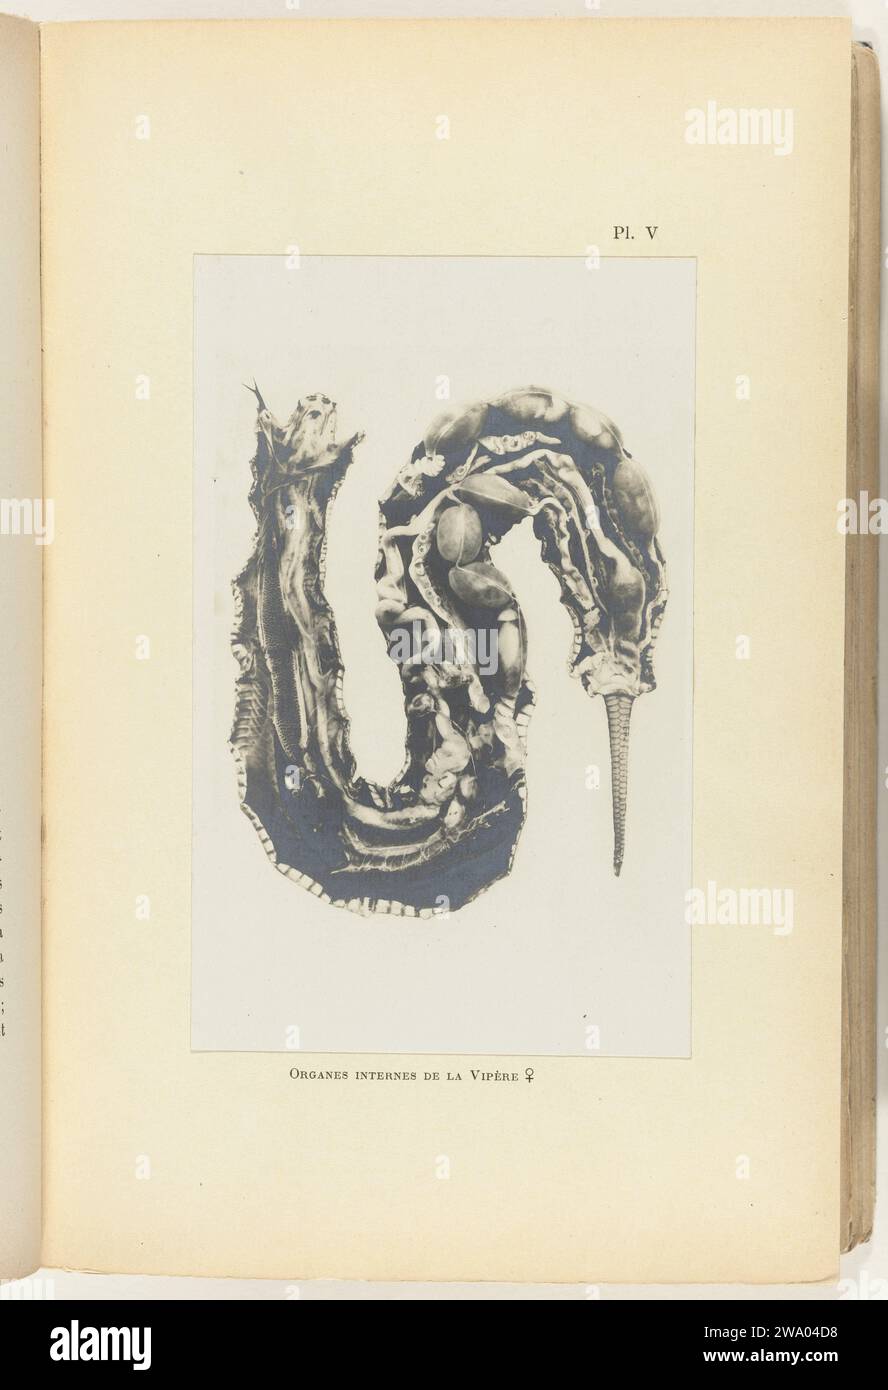 Cut adder opened with the organs visible, c. 1891 - In or Before 1901 photograph Foto in album 'The photograph of submerged objects', 1901. Paris photographic support gelatin silver print snakes: viper. physiology and anatomy Stock Photo